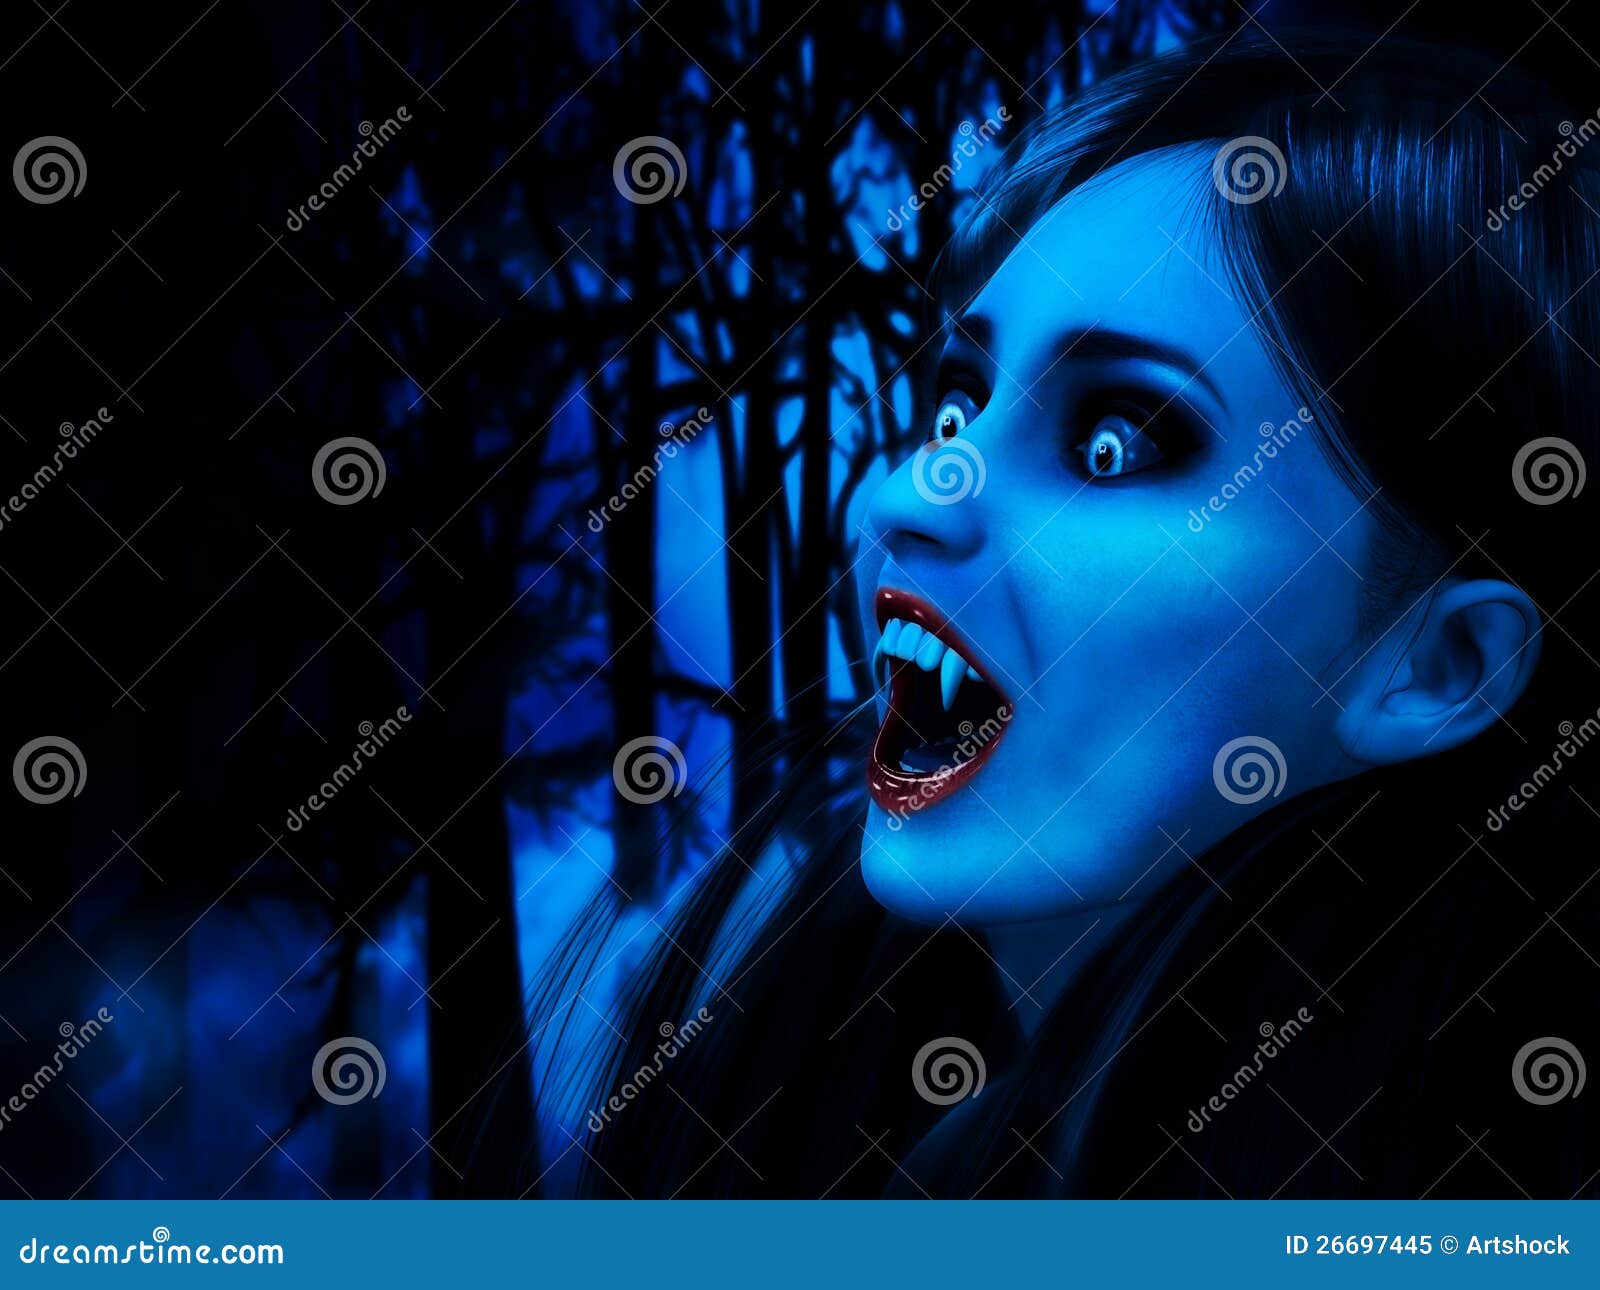 215 Vampire Teeth Kids Stock Photos, High-Res Pictures, and Images